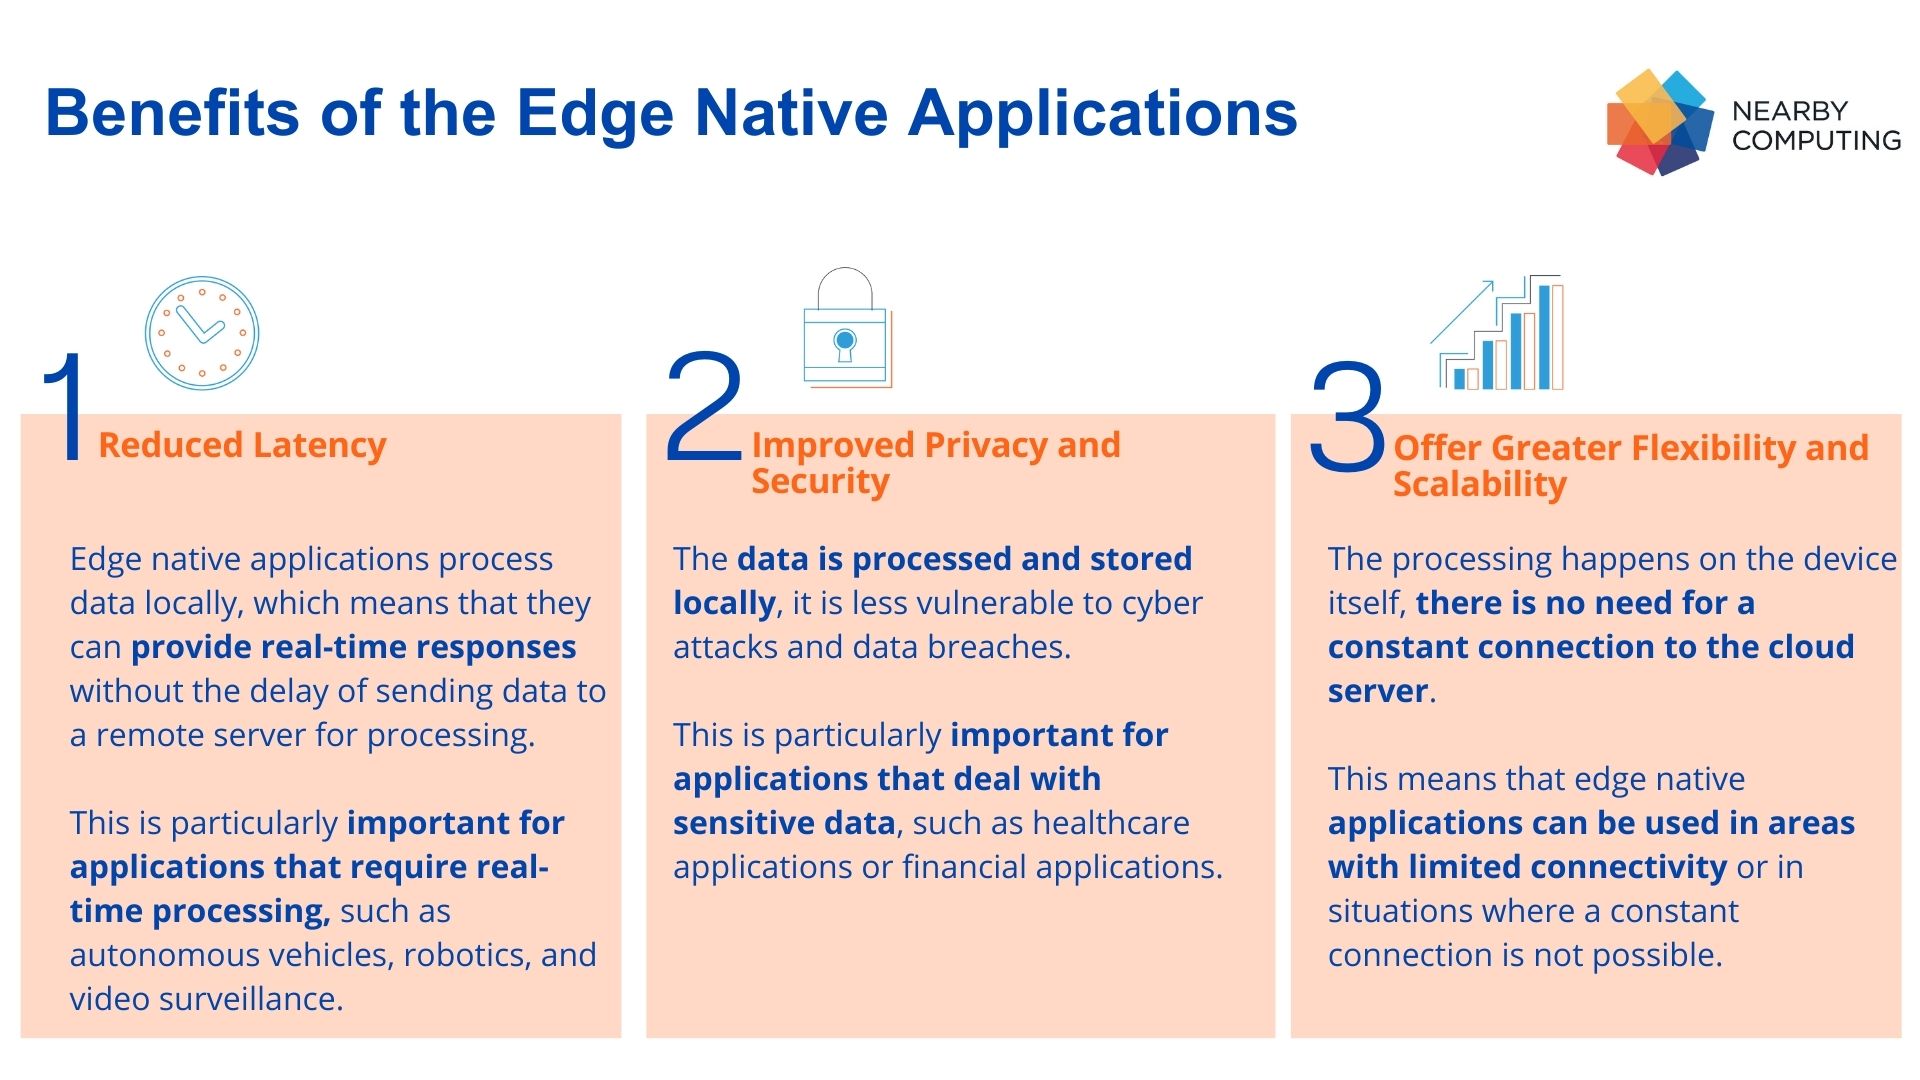 Benefits of Edge Native Applications